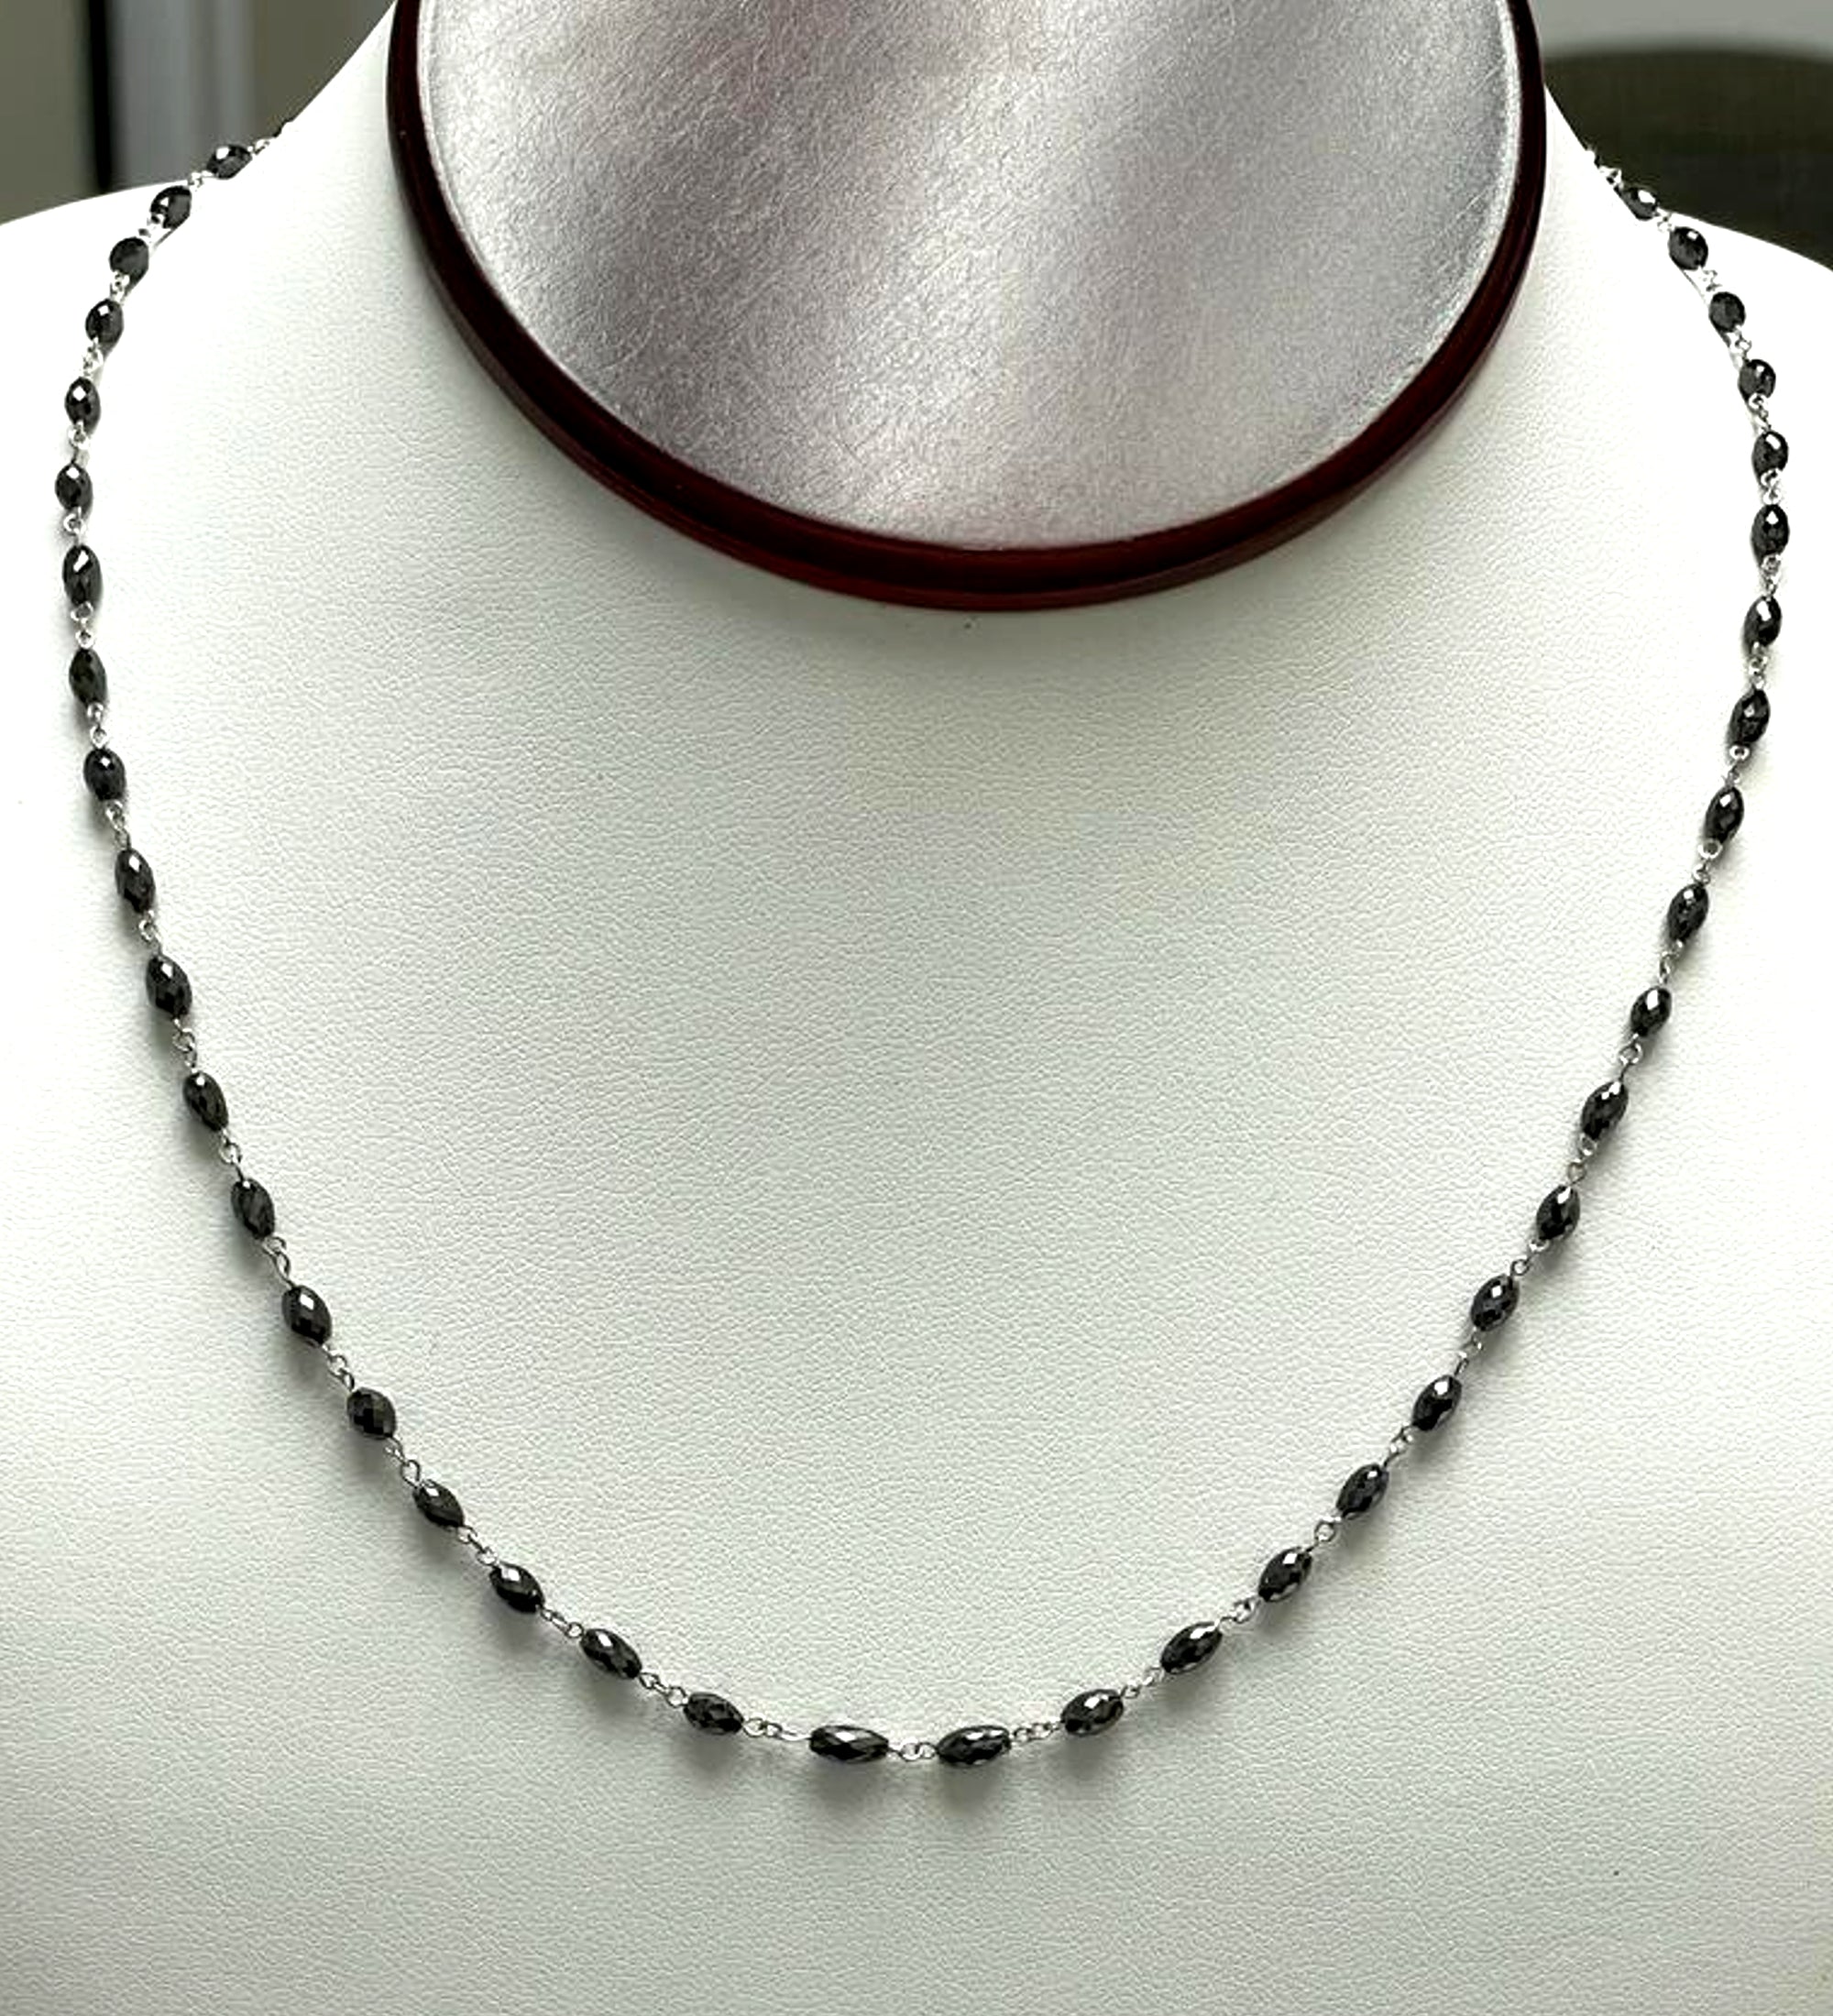 17" Inch Faceted Necklace Black Diamond Necklace For Her Birthday Gift